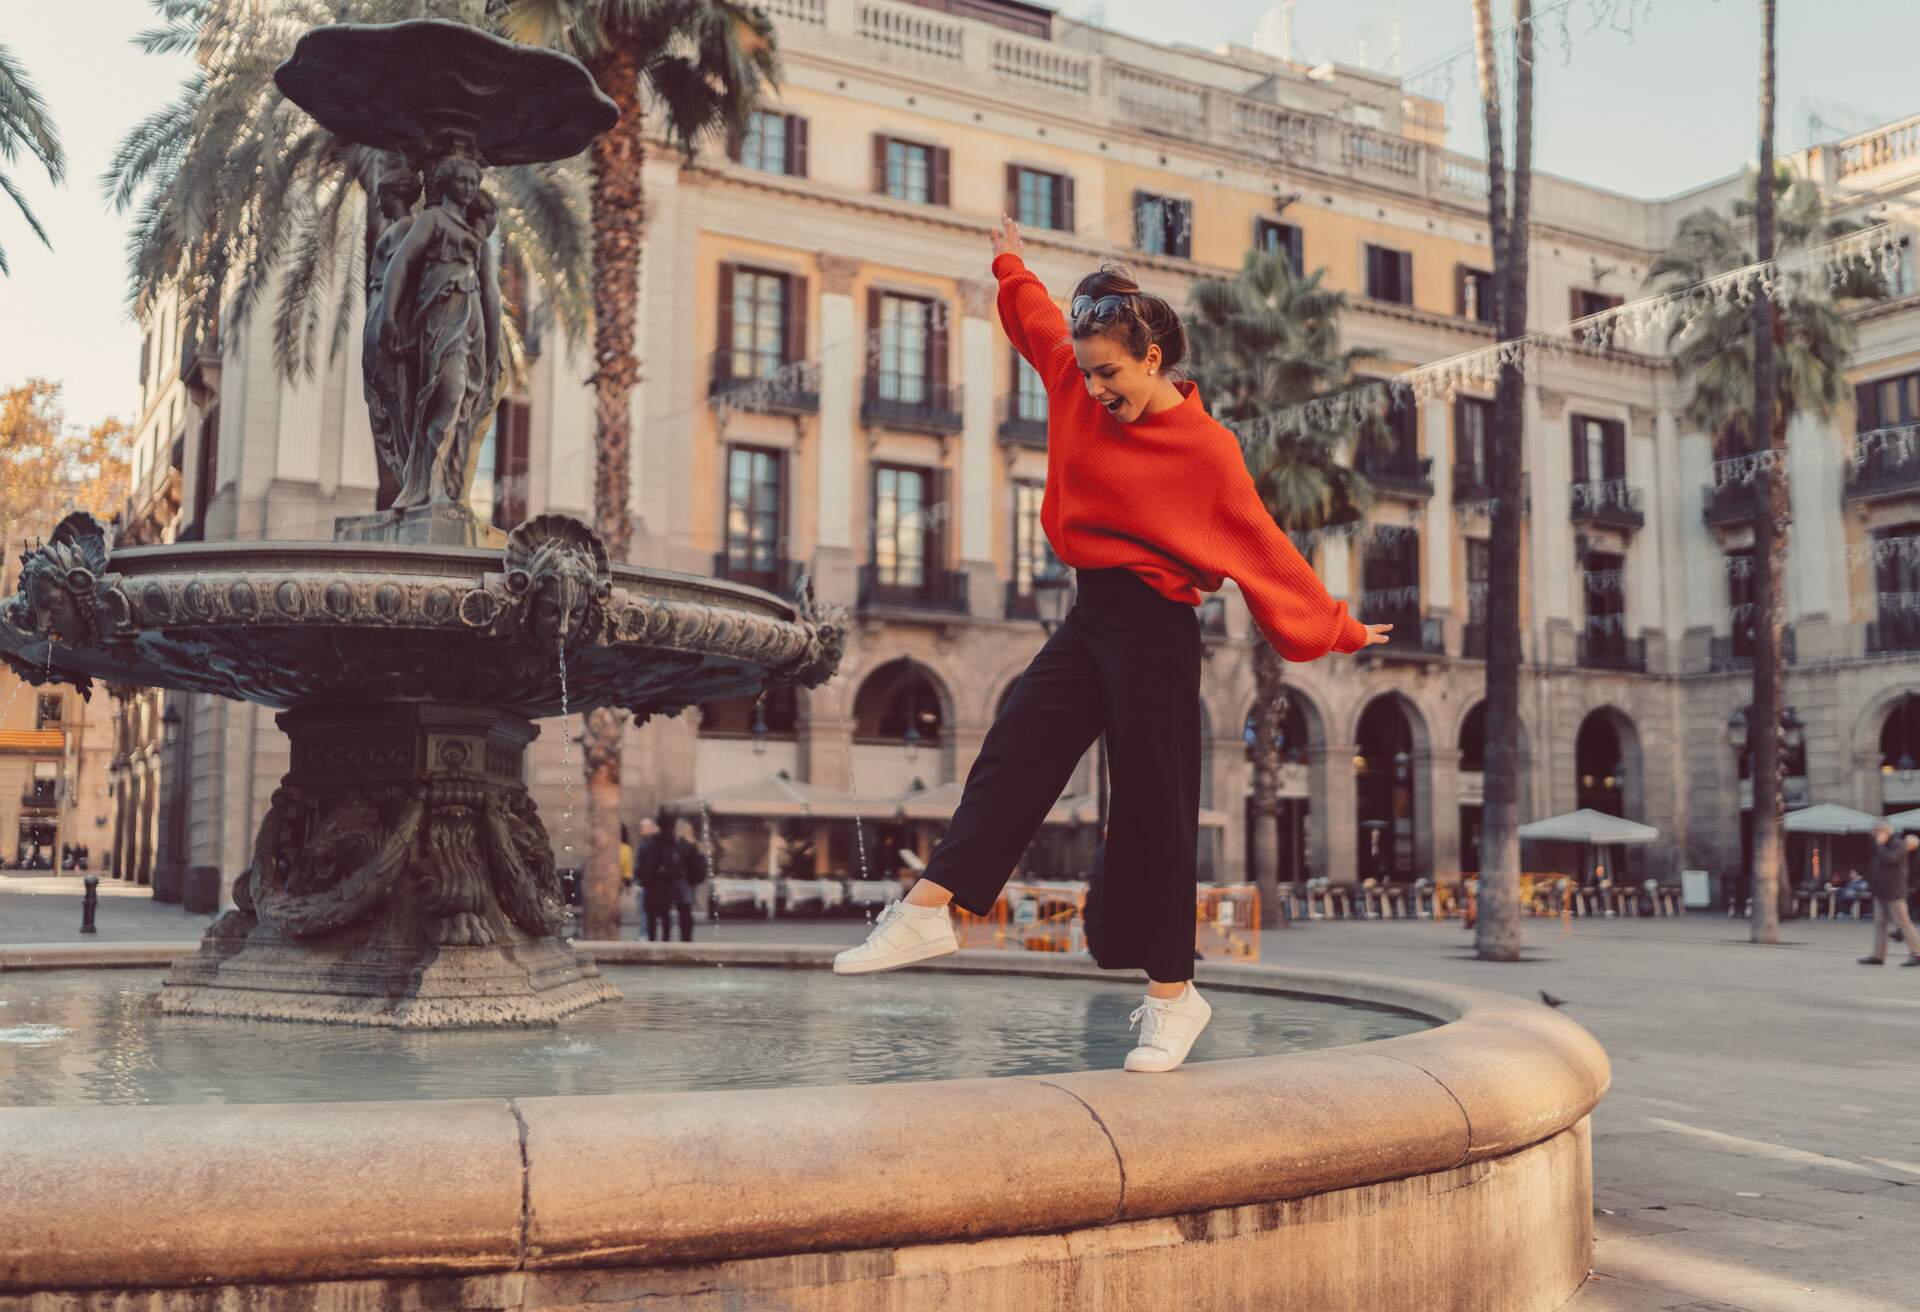 A happy lady balancing at the edge of a fountain in the city square enclosed by buildings.